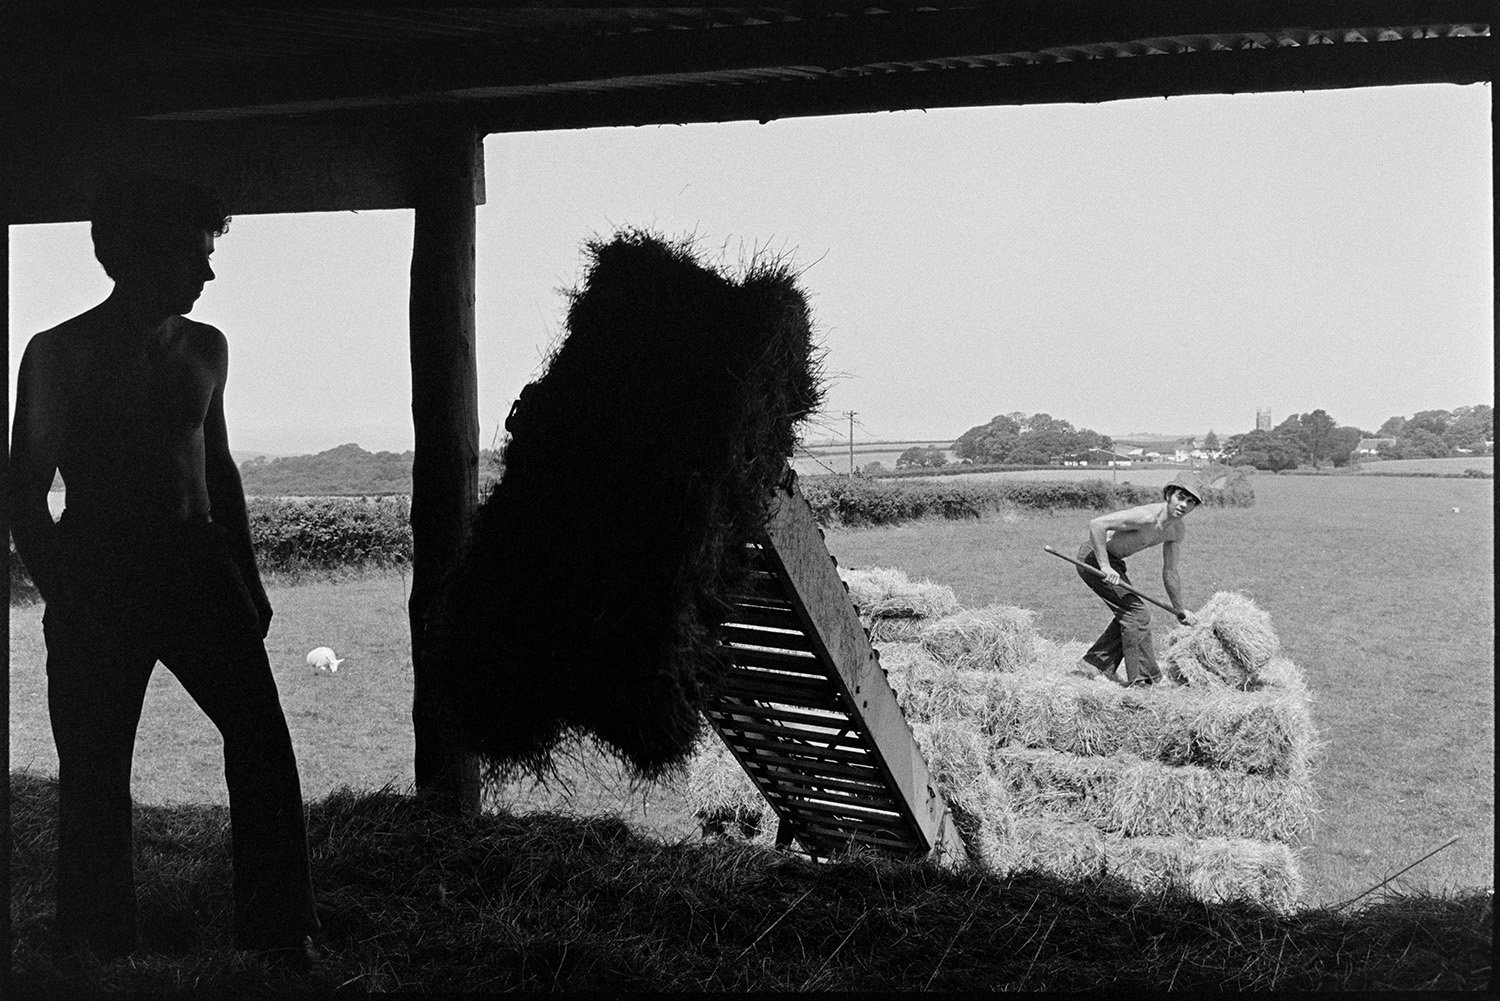 David Ward and Graham Ward loading hay bales into a barn using an elevator at Parsonage, Iddesleigh. Fields, trees and a church tower can be seen in the background.